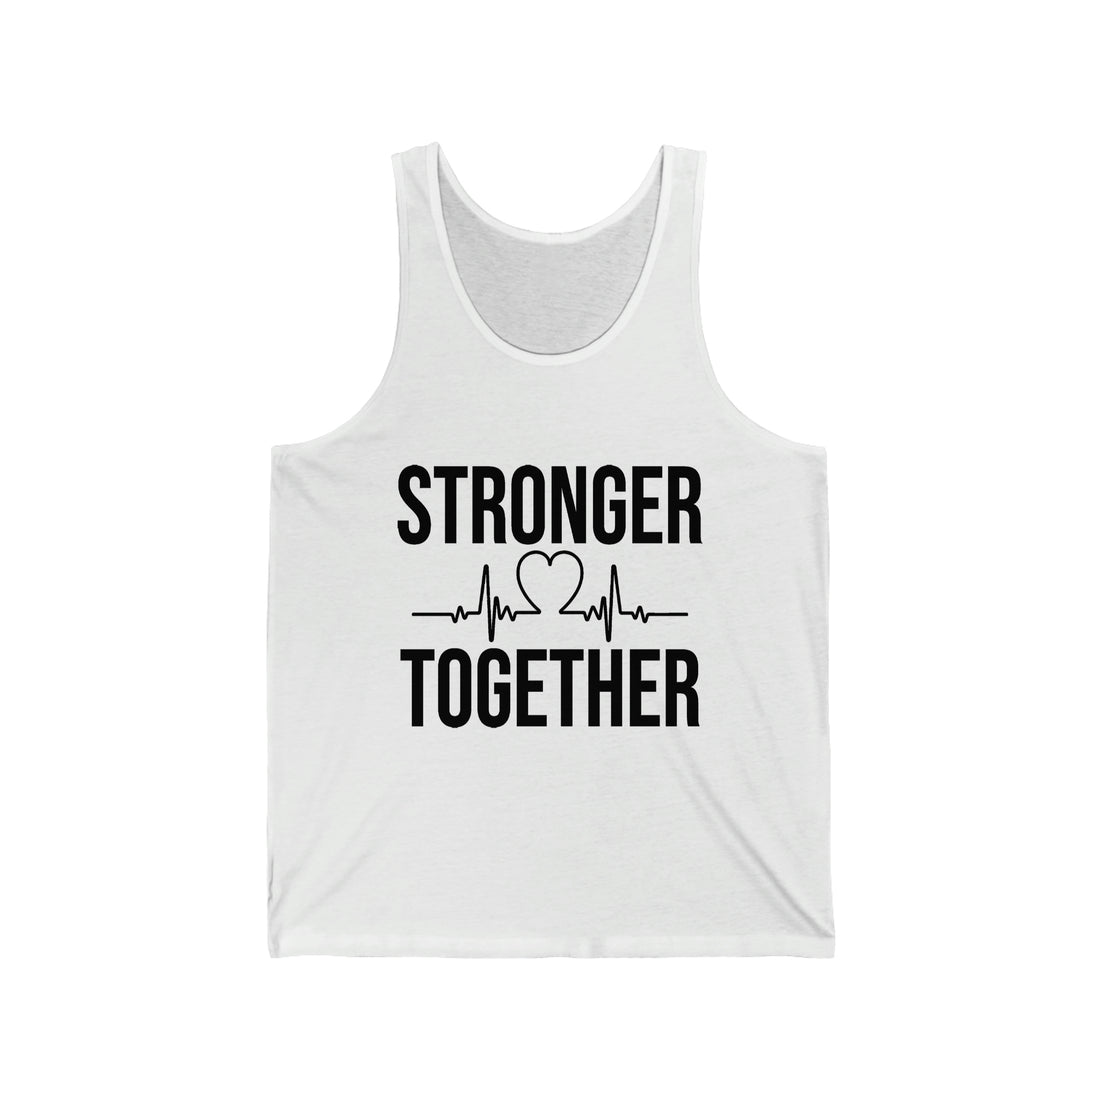 Stronger Together - Unisex Jersey Tank Top